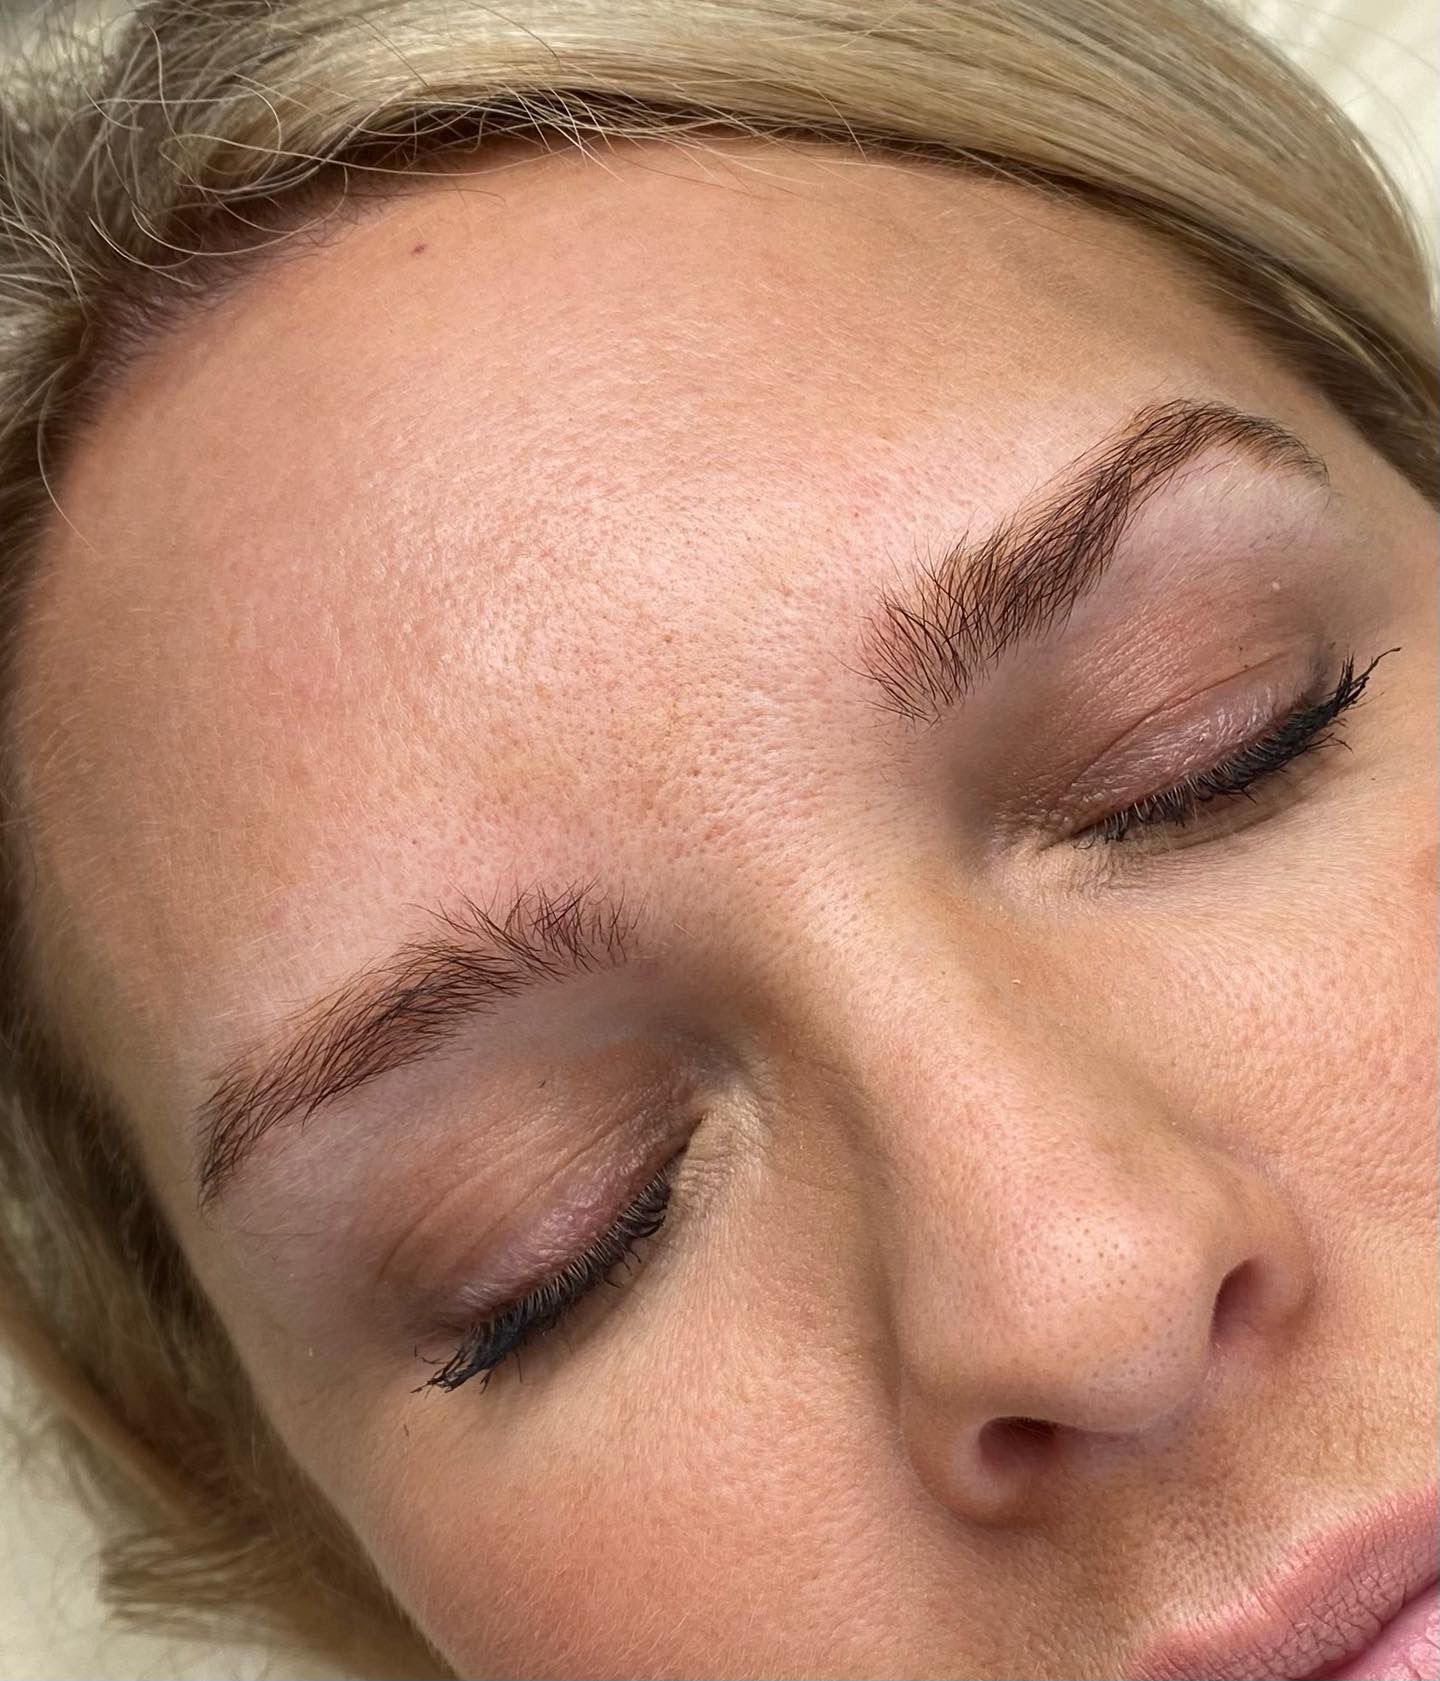 Hairstroke Brows by Rebecca Ryther in Southend, Essex